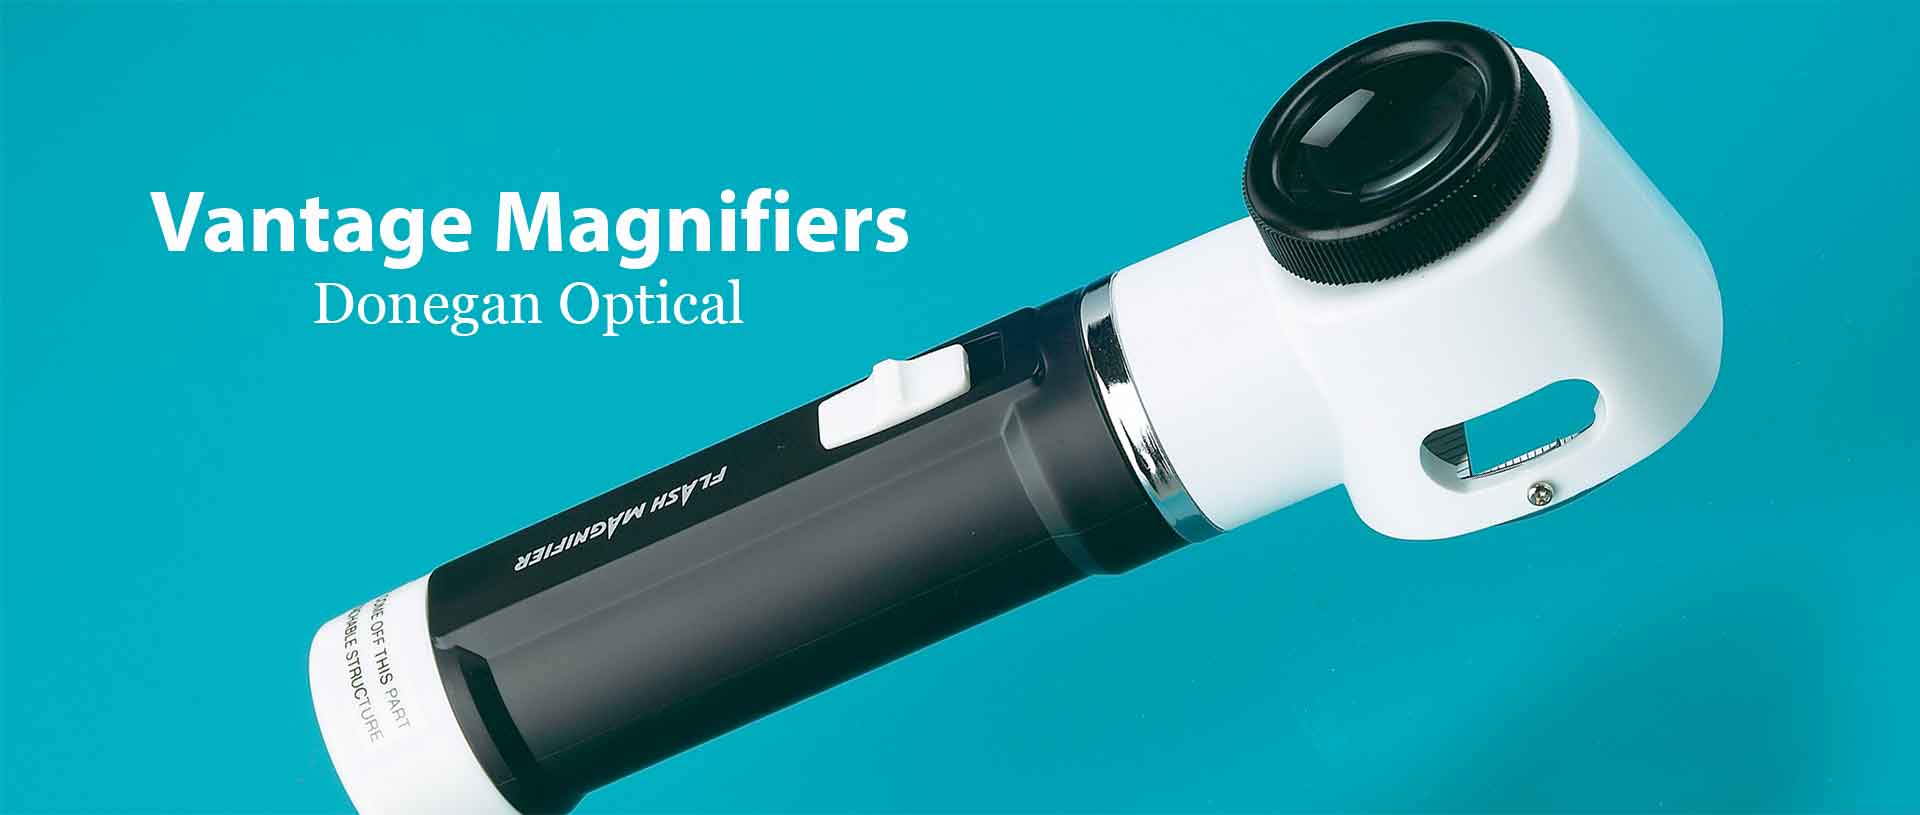 Handsfree Magnifiers Archives - Donegan Optical Company, Inc.